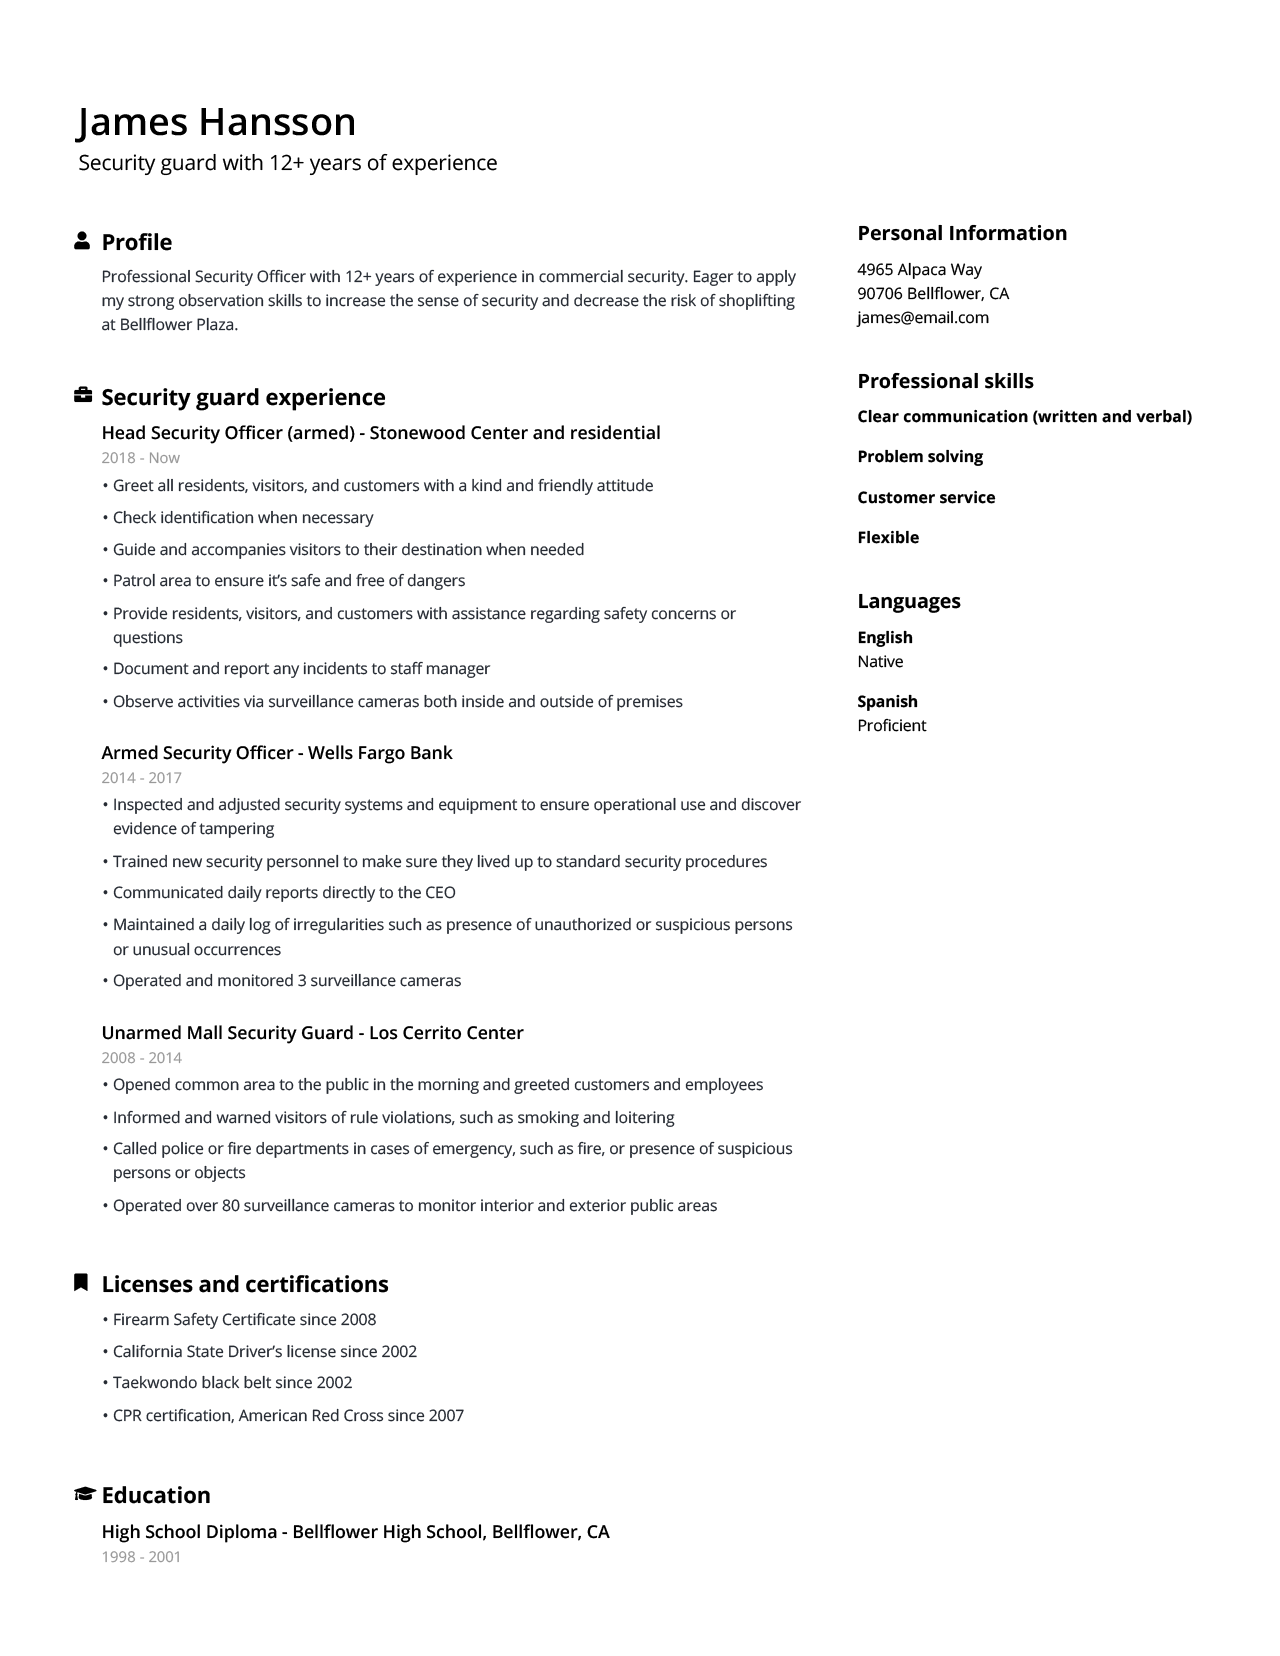 example of resume objective for security guard